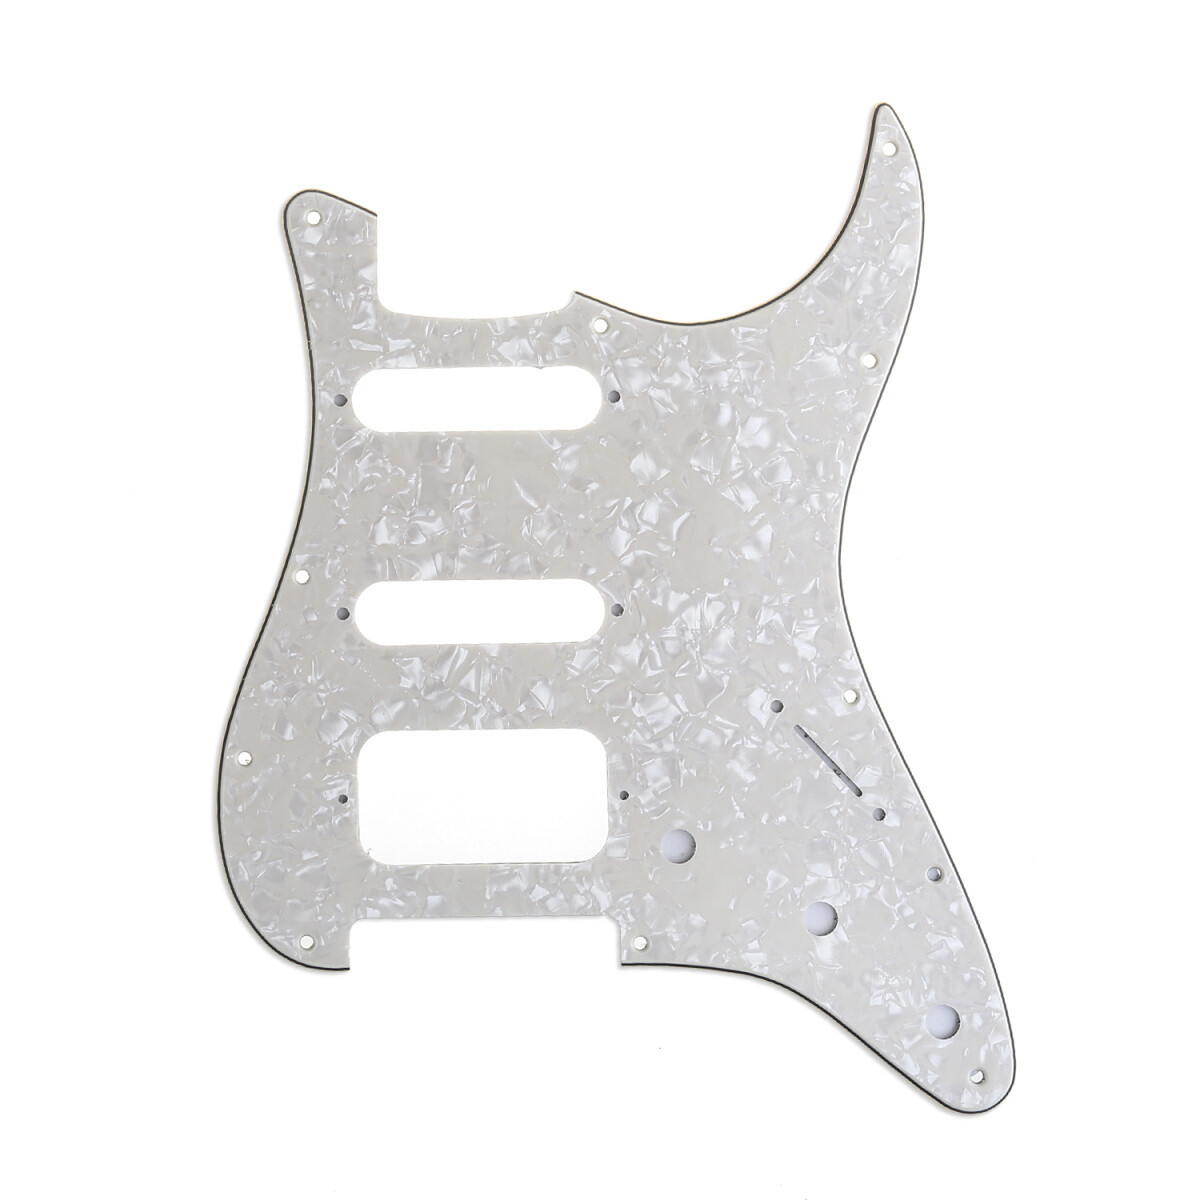 Brio 11-Hole Modern Style Strat HSS Pickguard for American Stratocaster Pearloid Aged White [Round Corners]